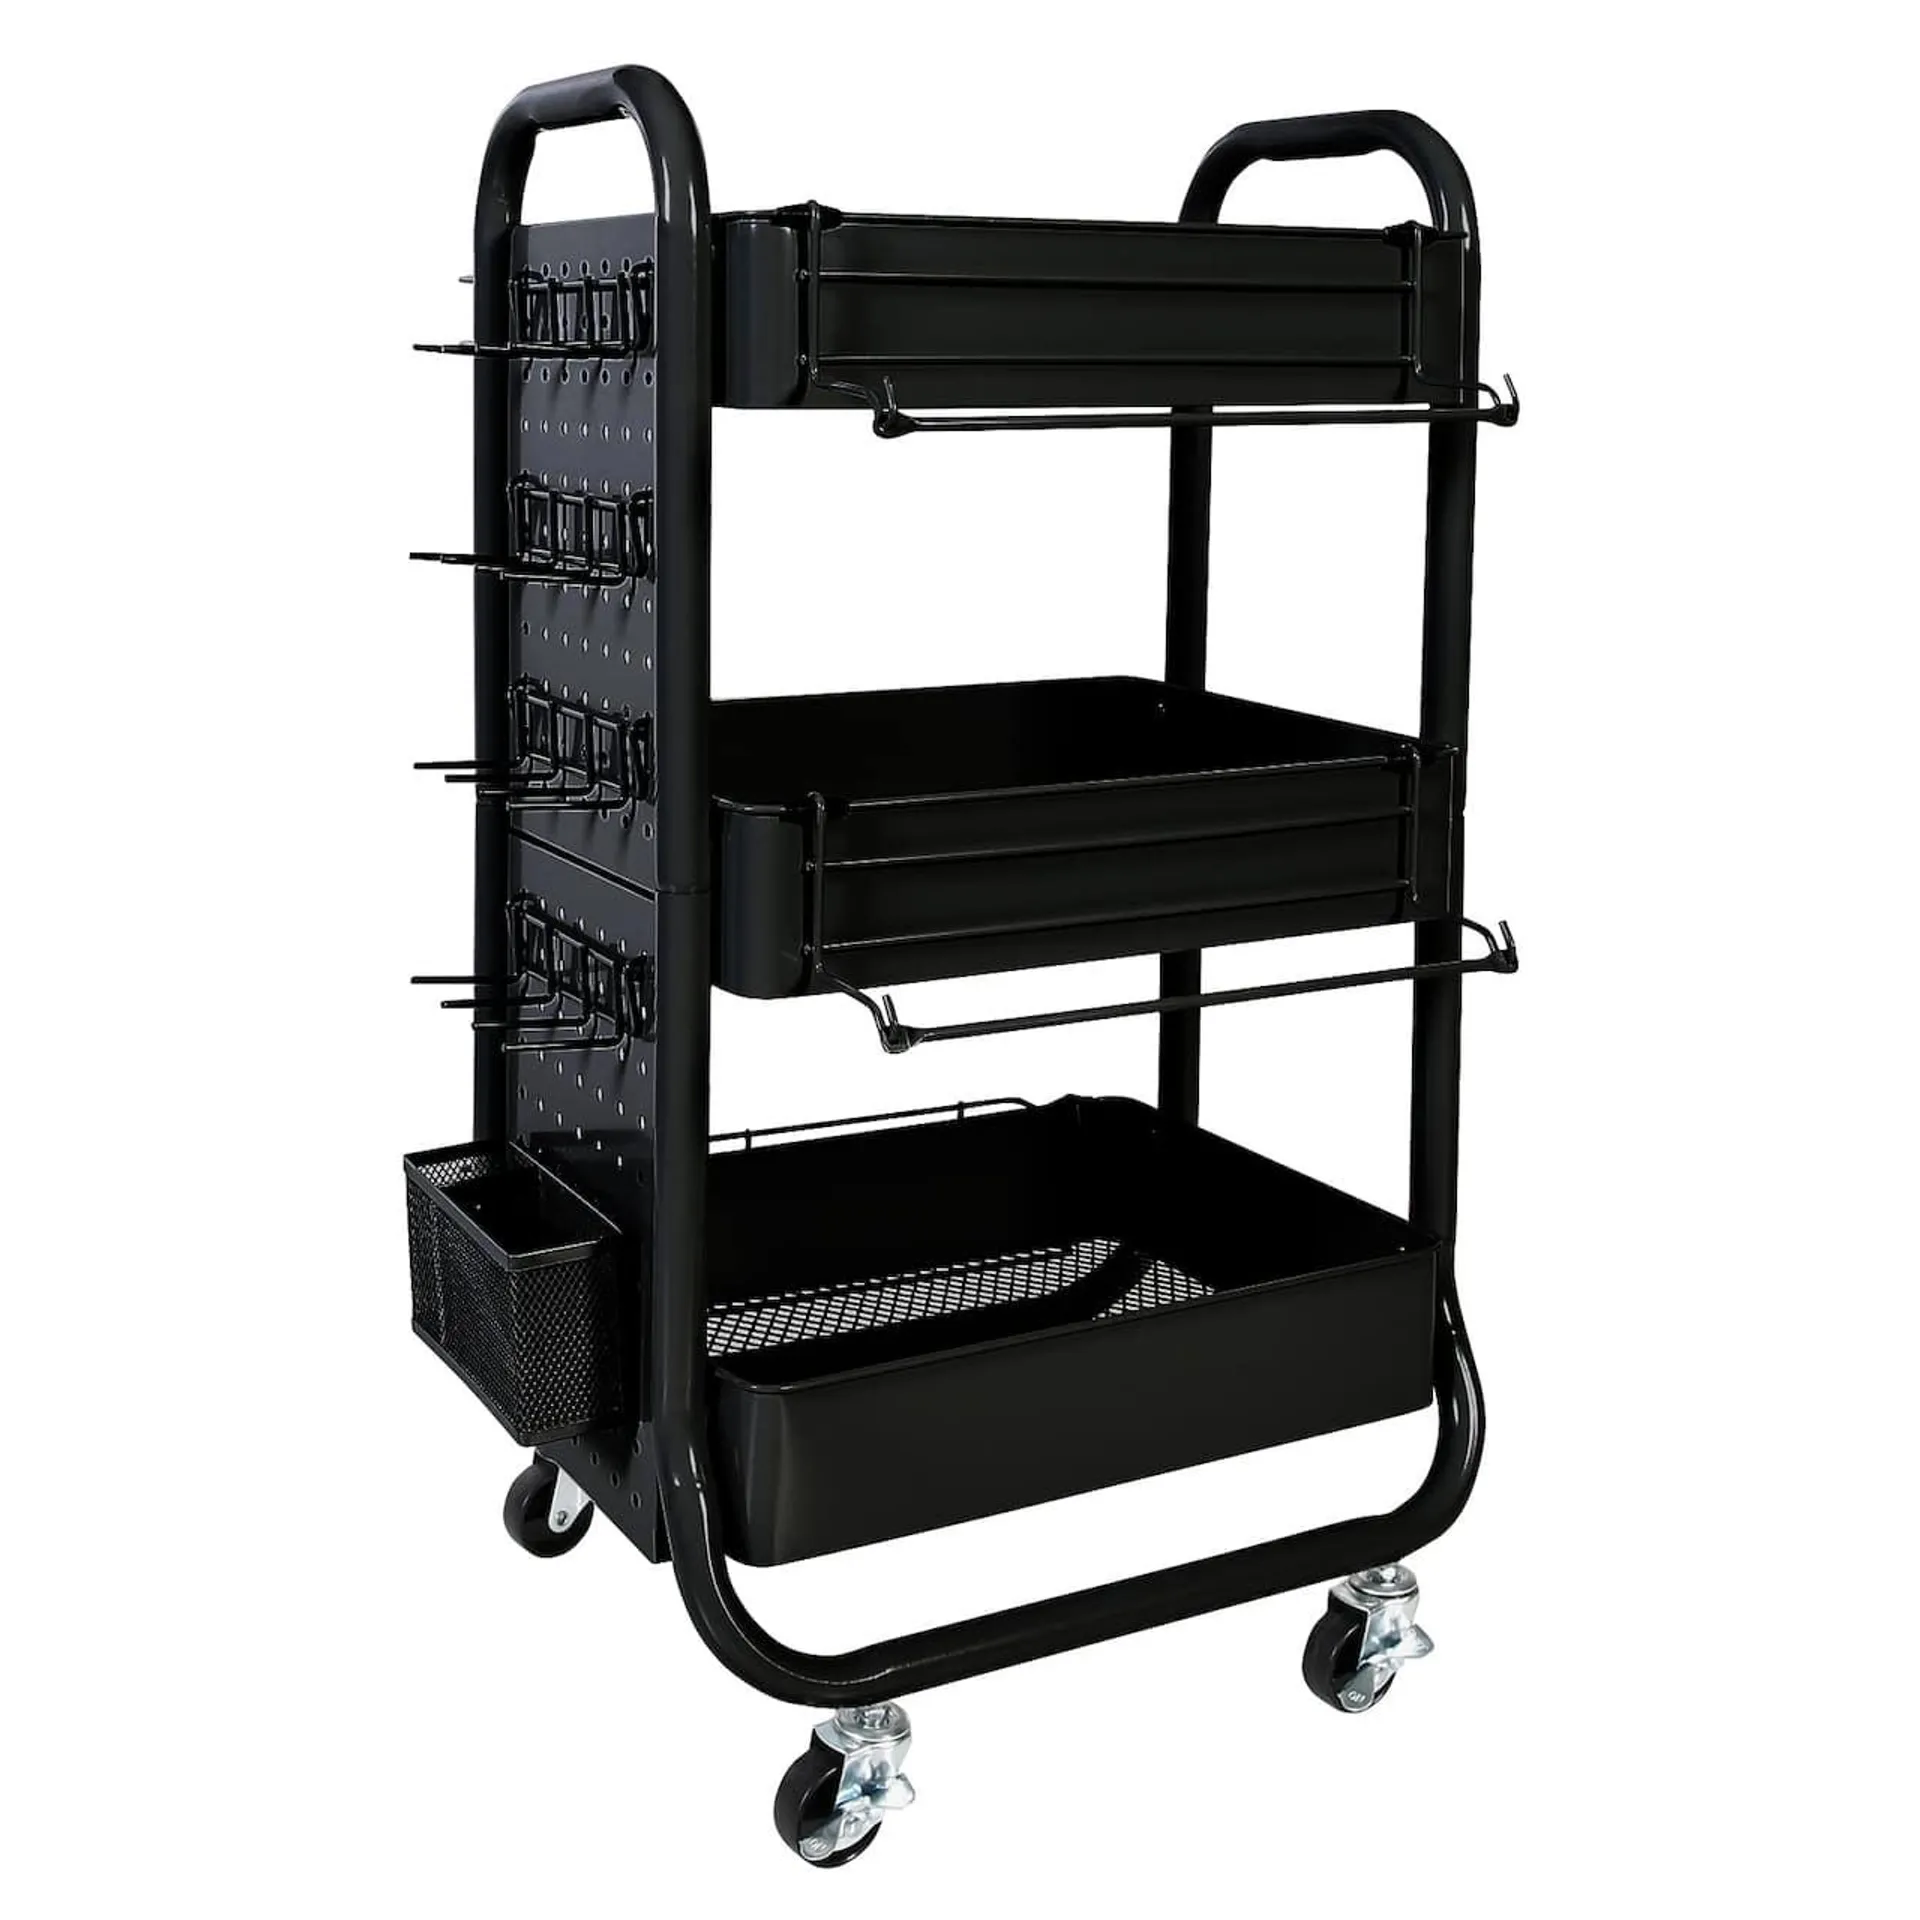 Gramercy Rolling Cart by Simply Tidy™